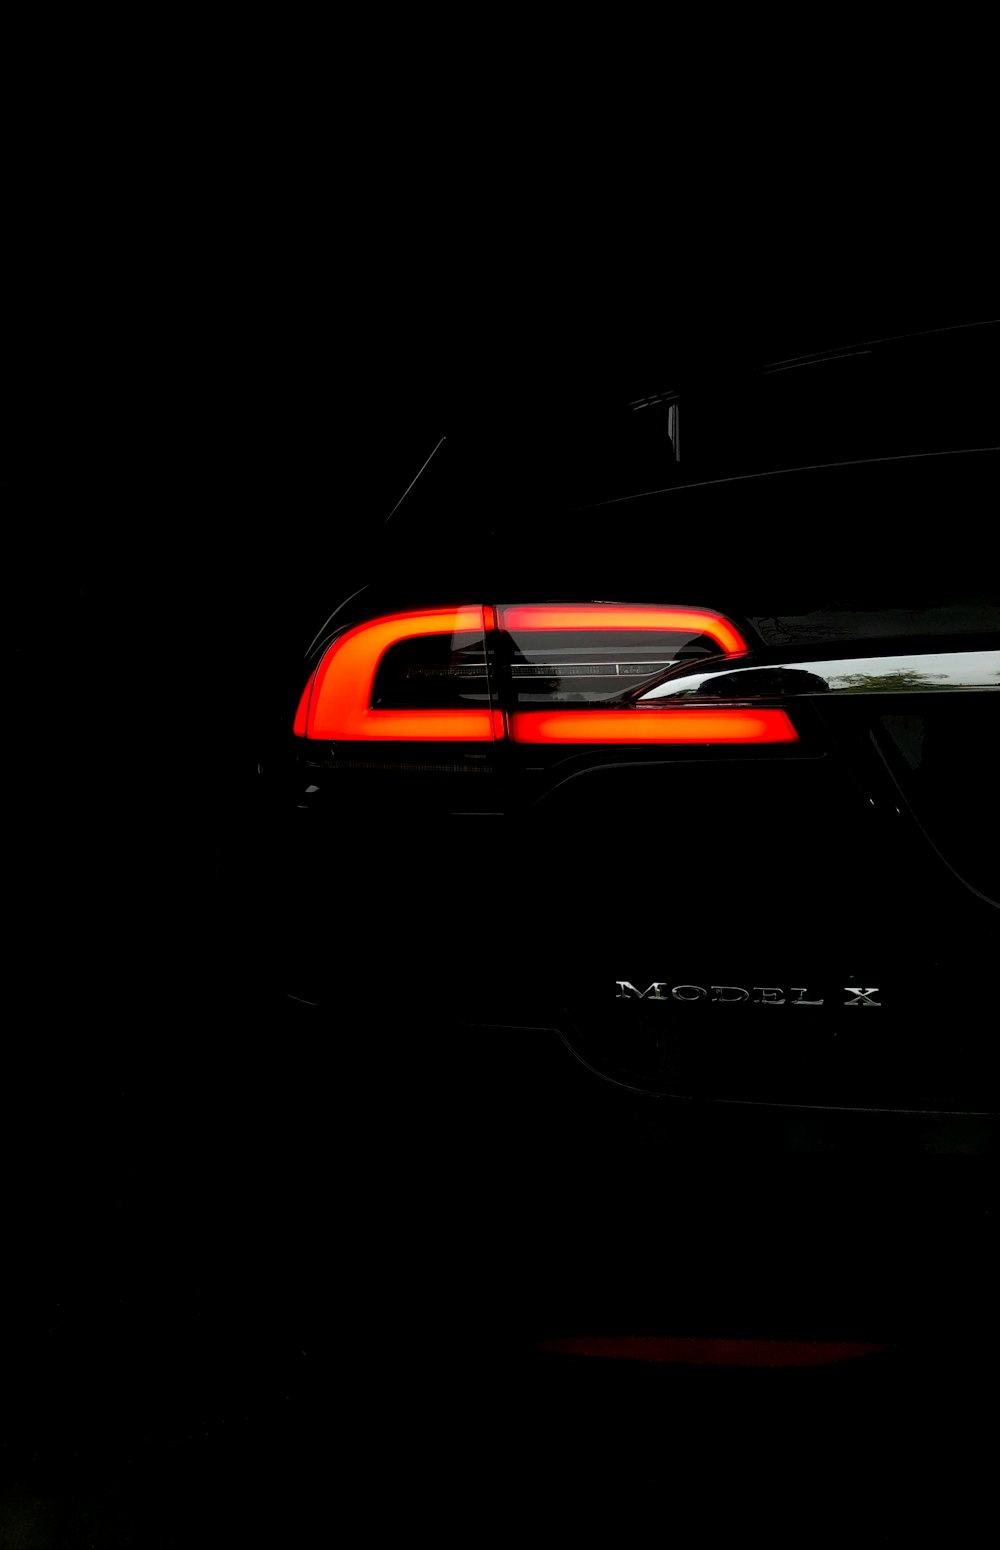 taillight of Model X vehicle